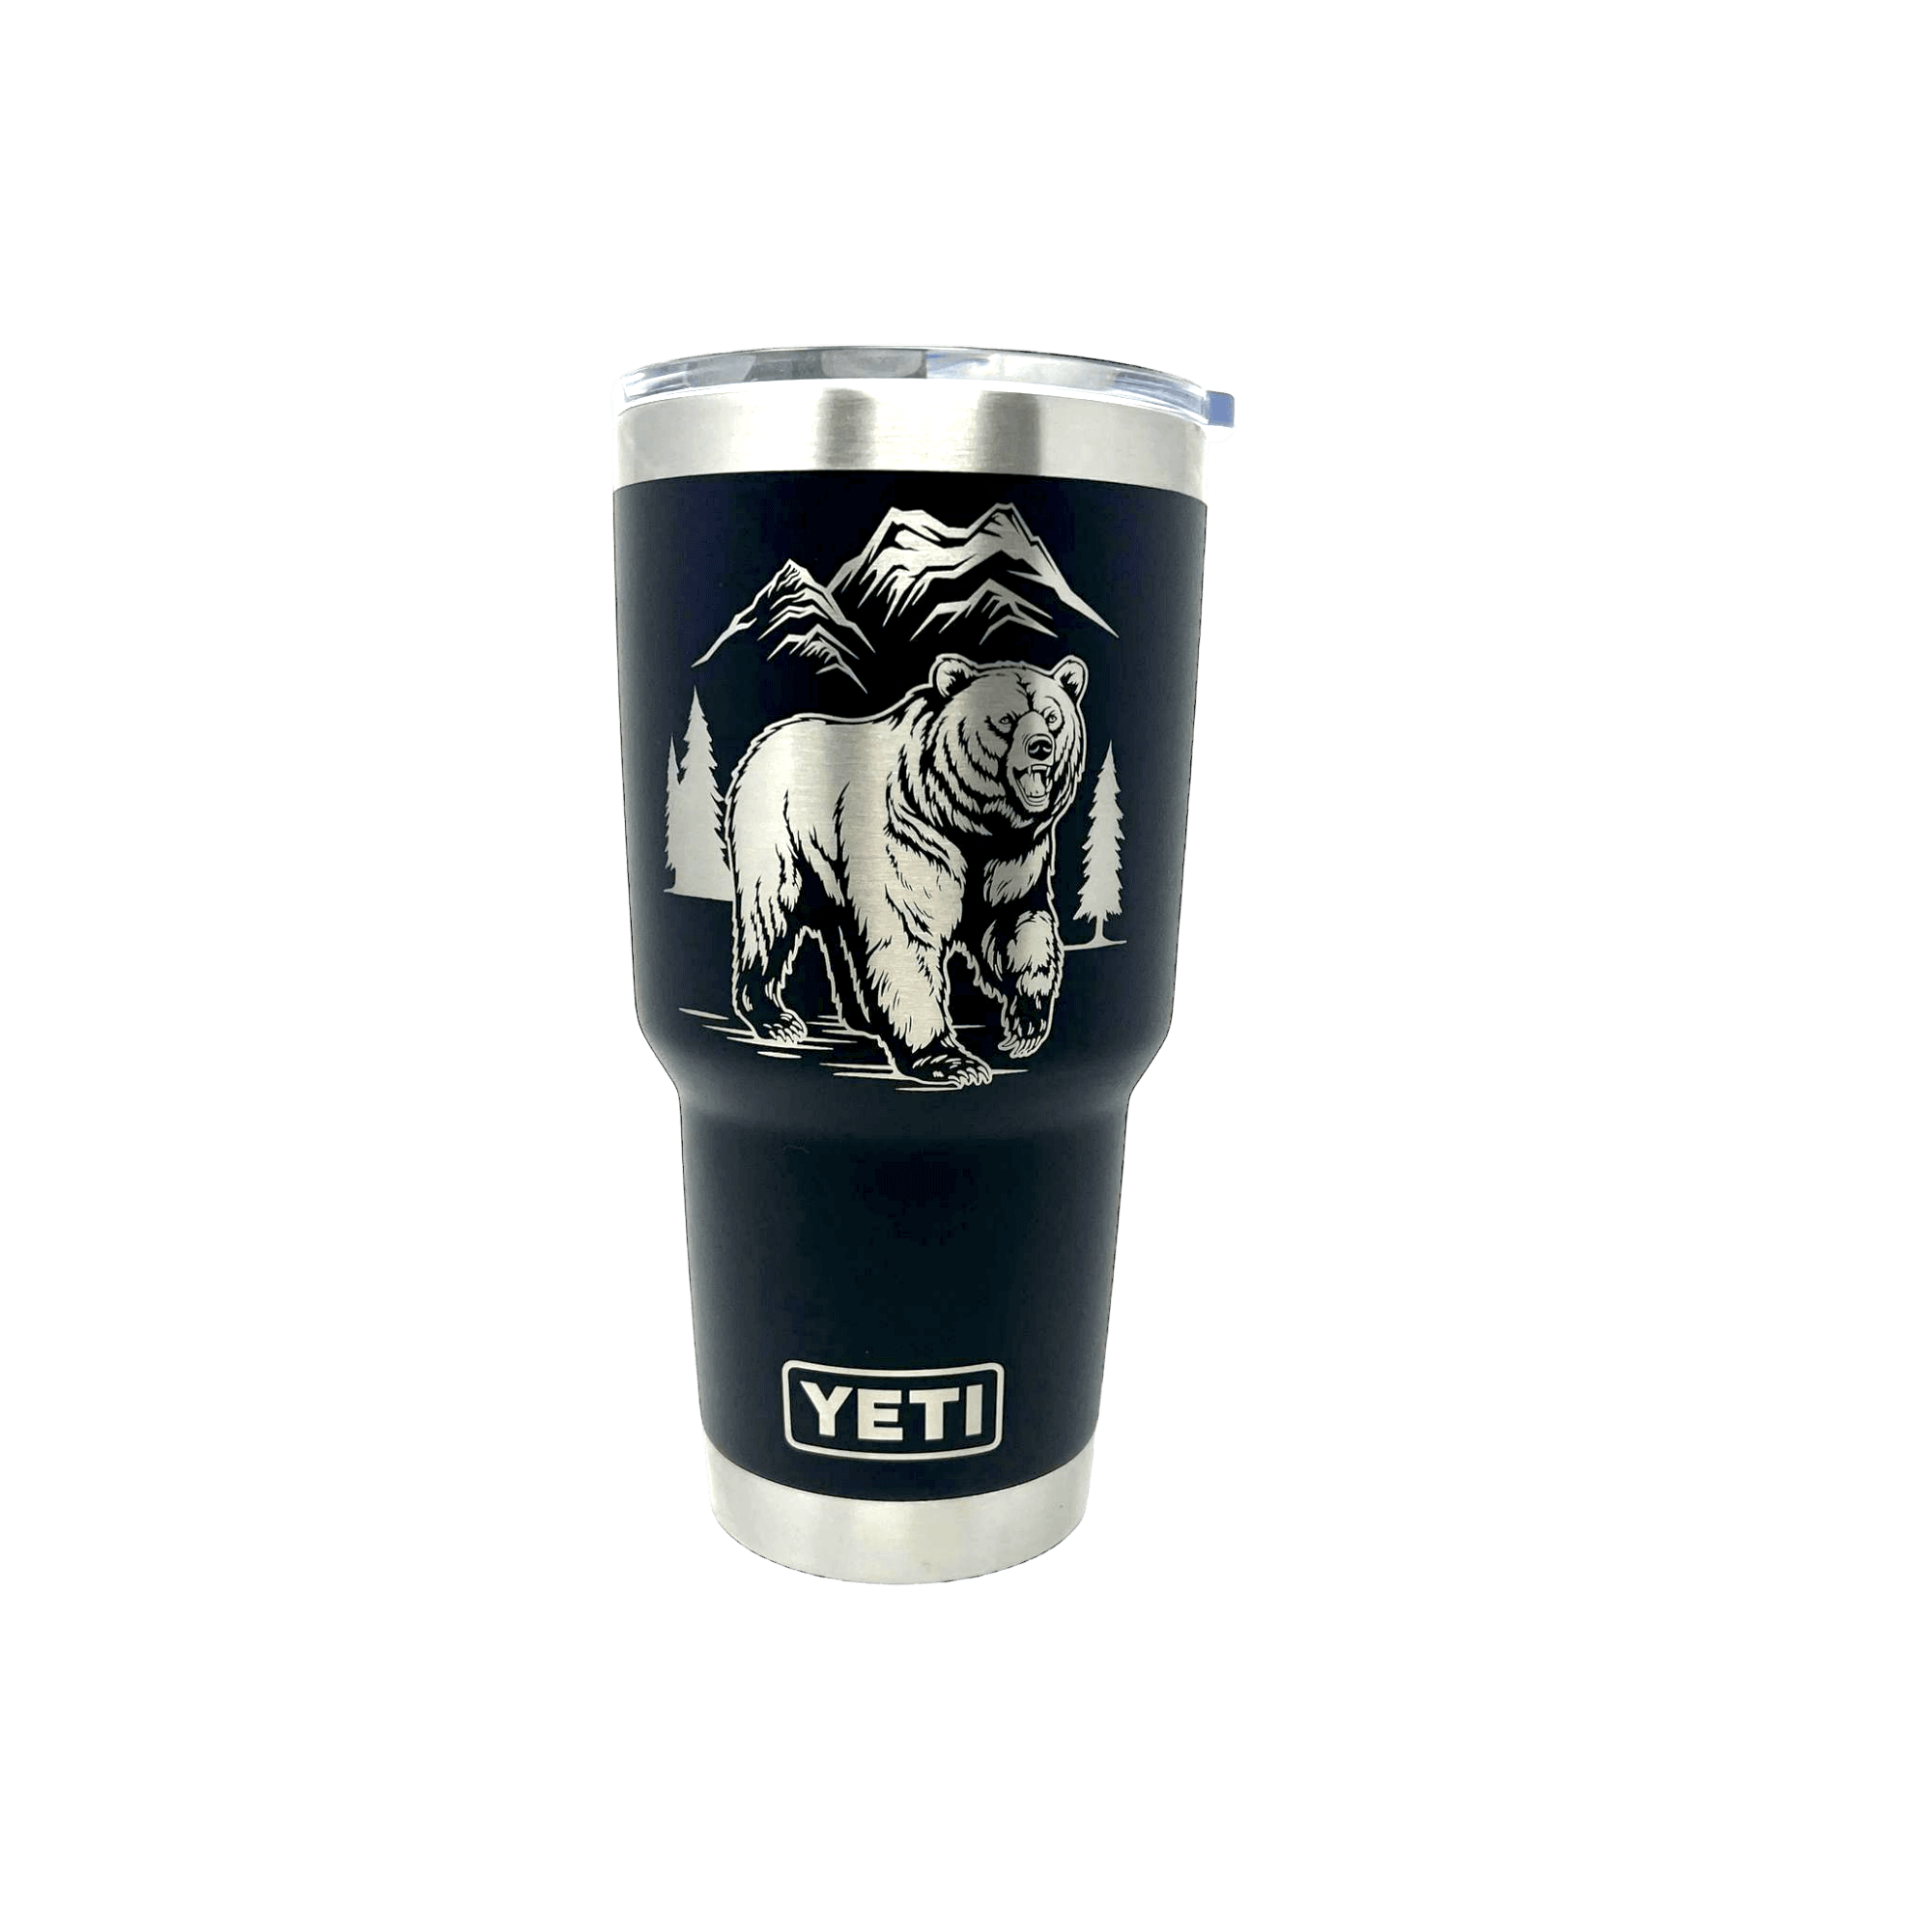 Grizzly Bear artwork laser engraved - silver on black Yeti tumbler with white background in photo